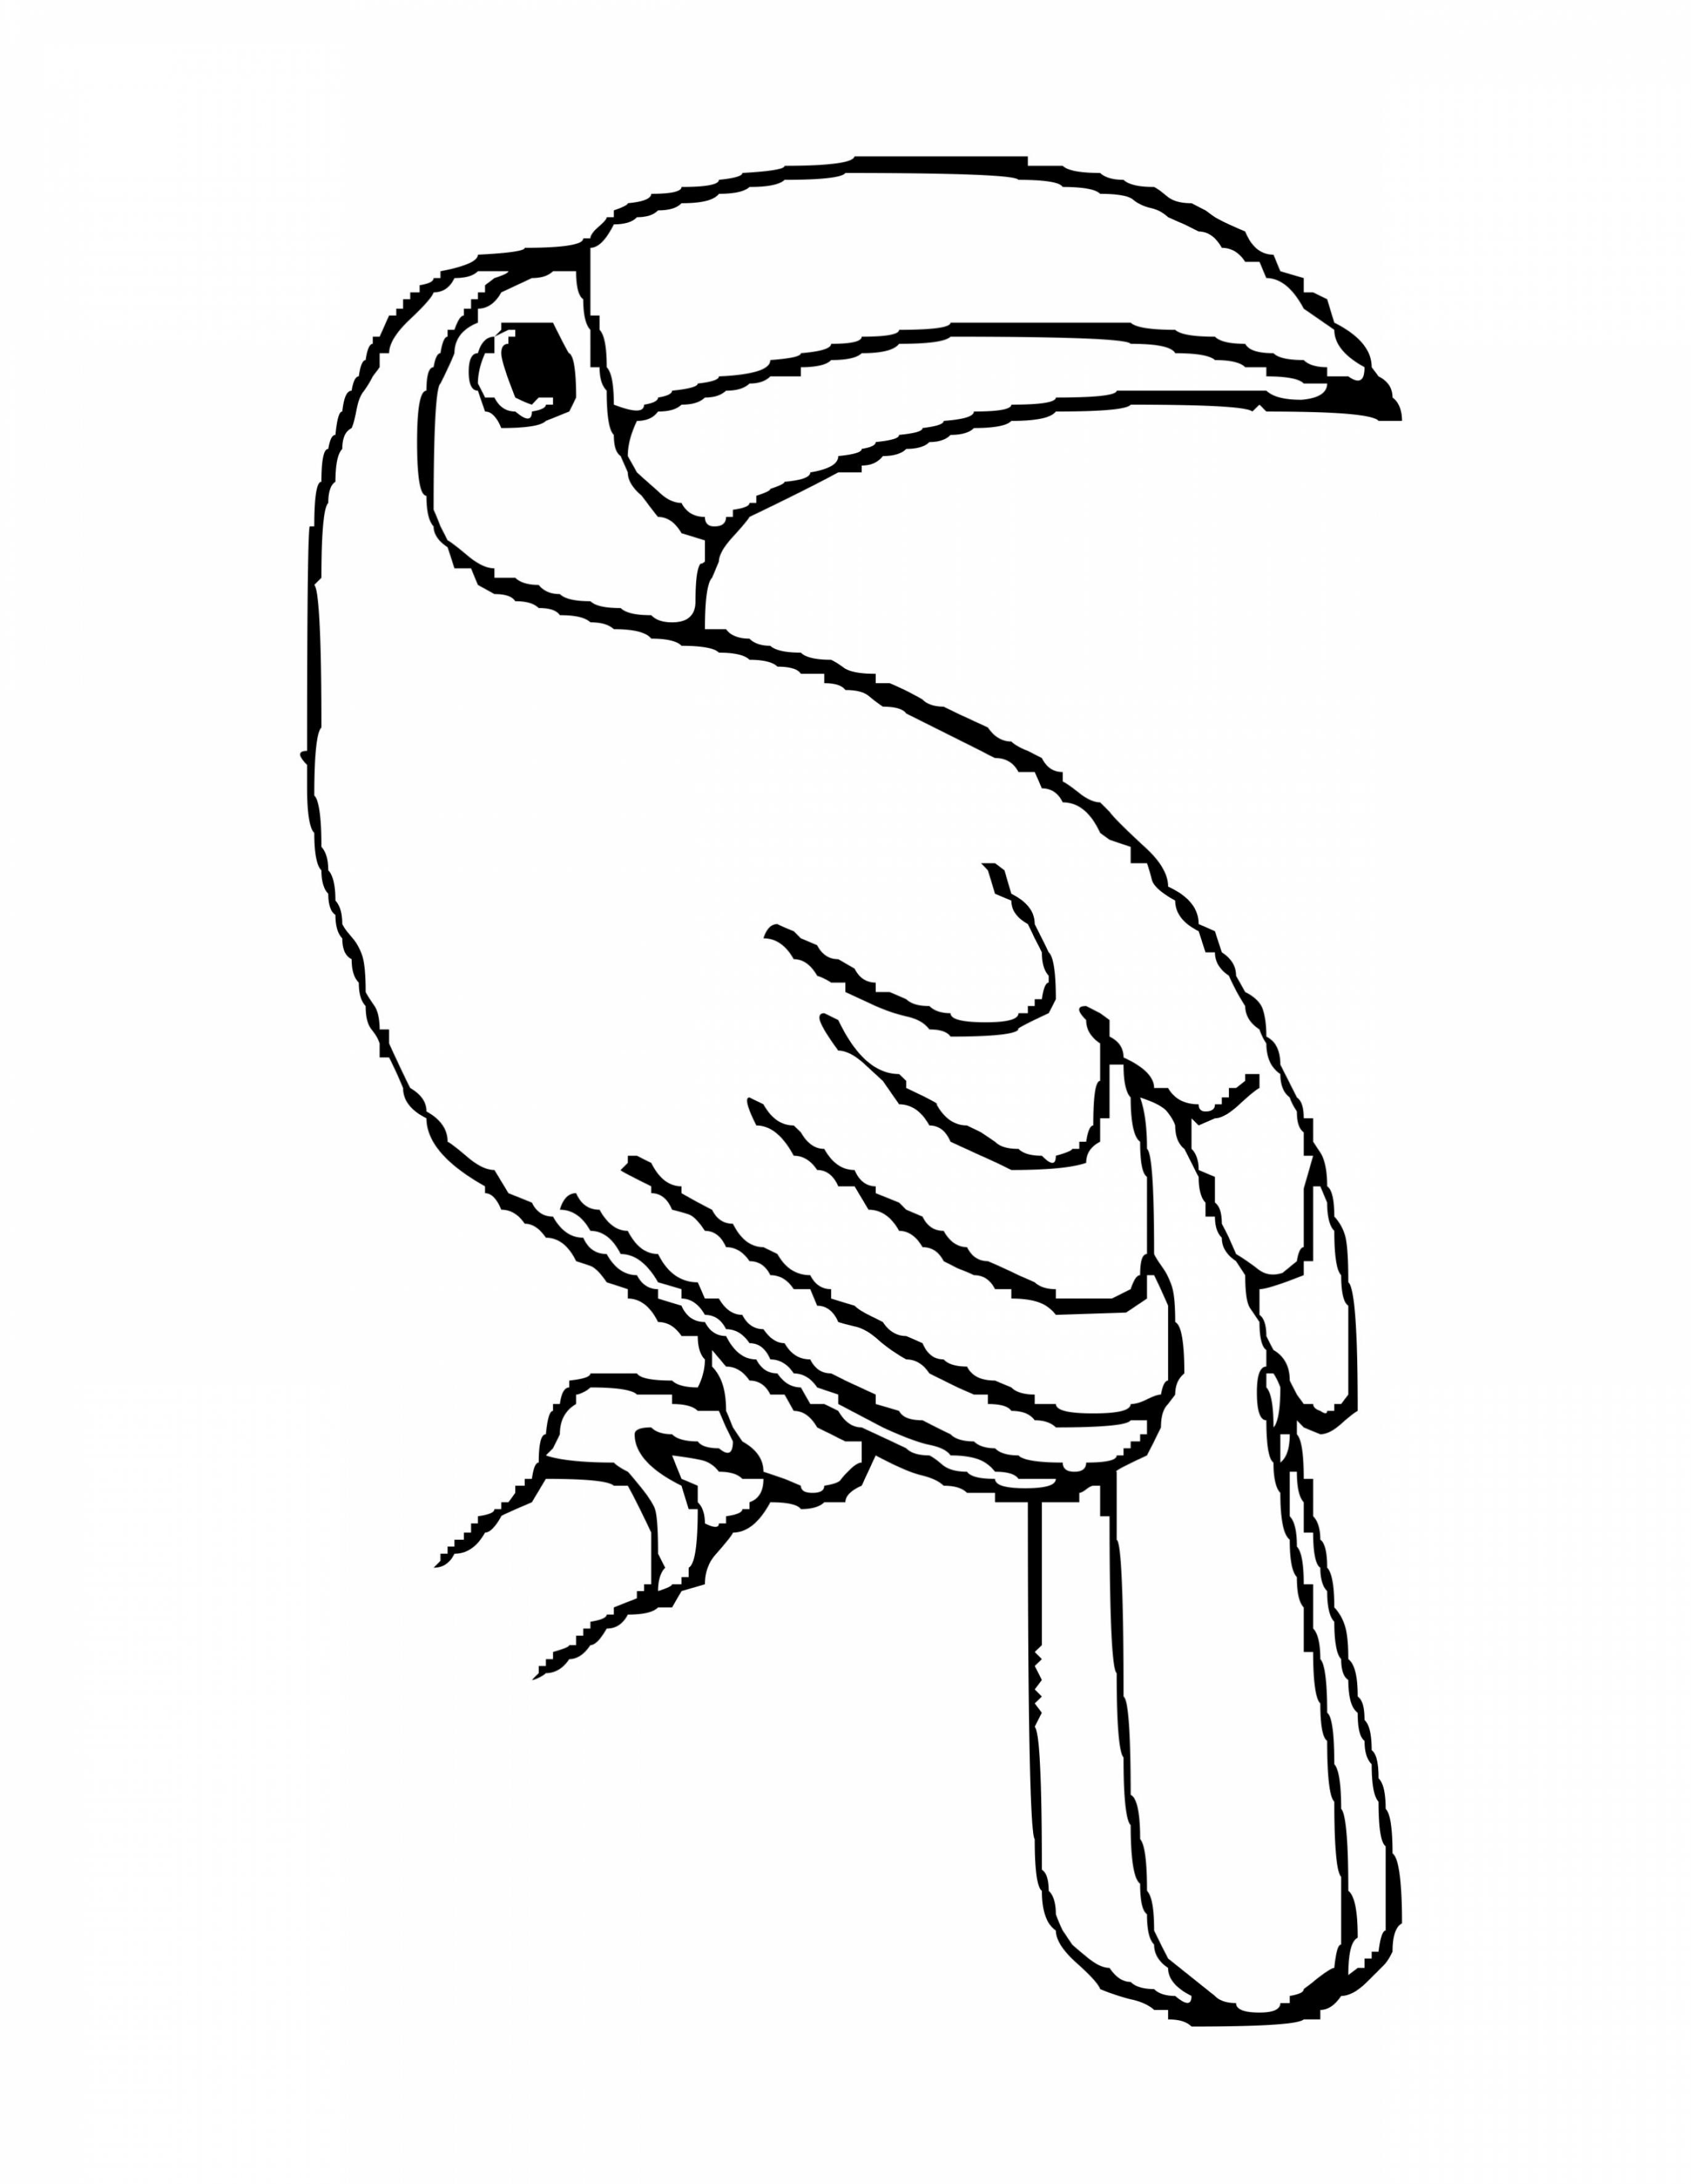 toucan-coloring-pages-best-coloring-pages-for-kids